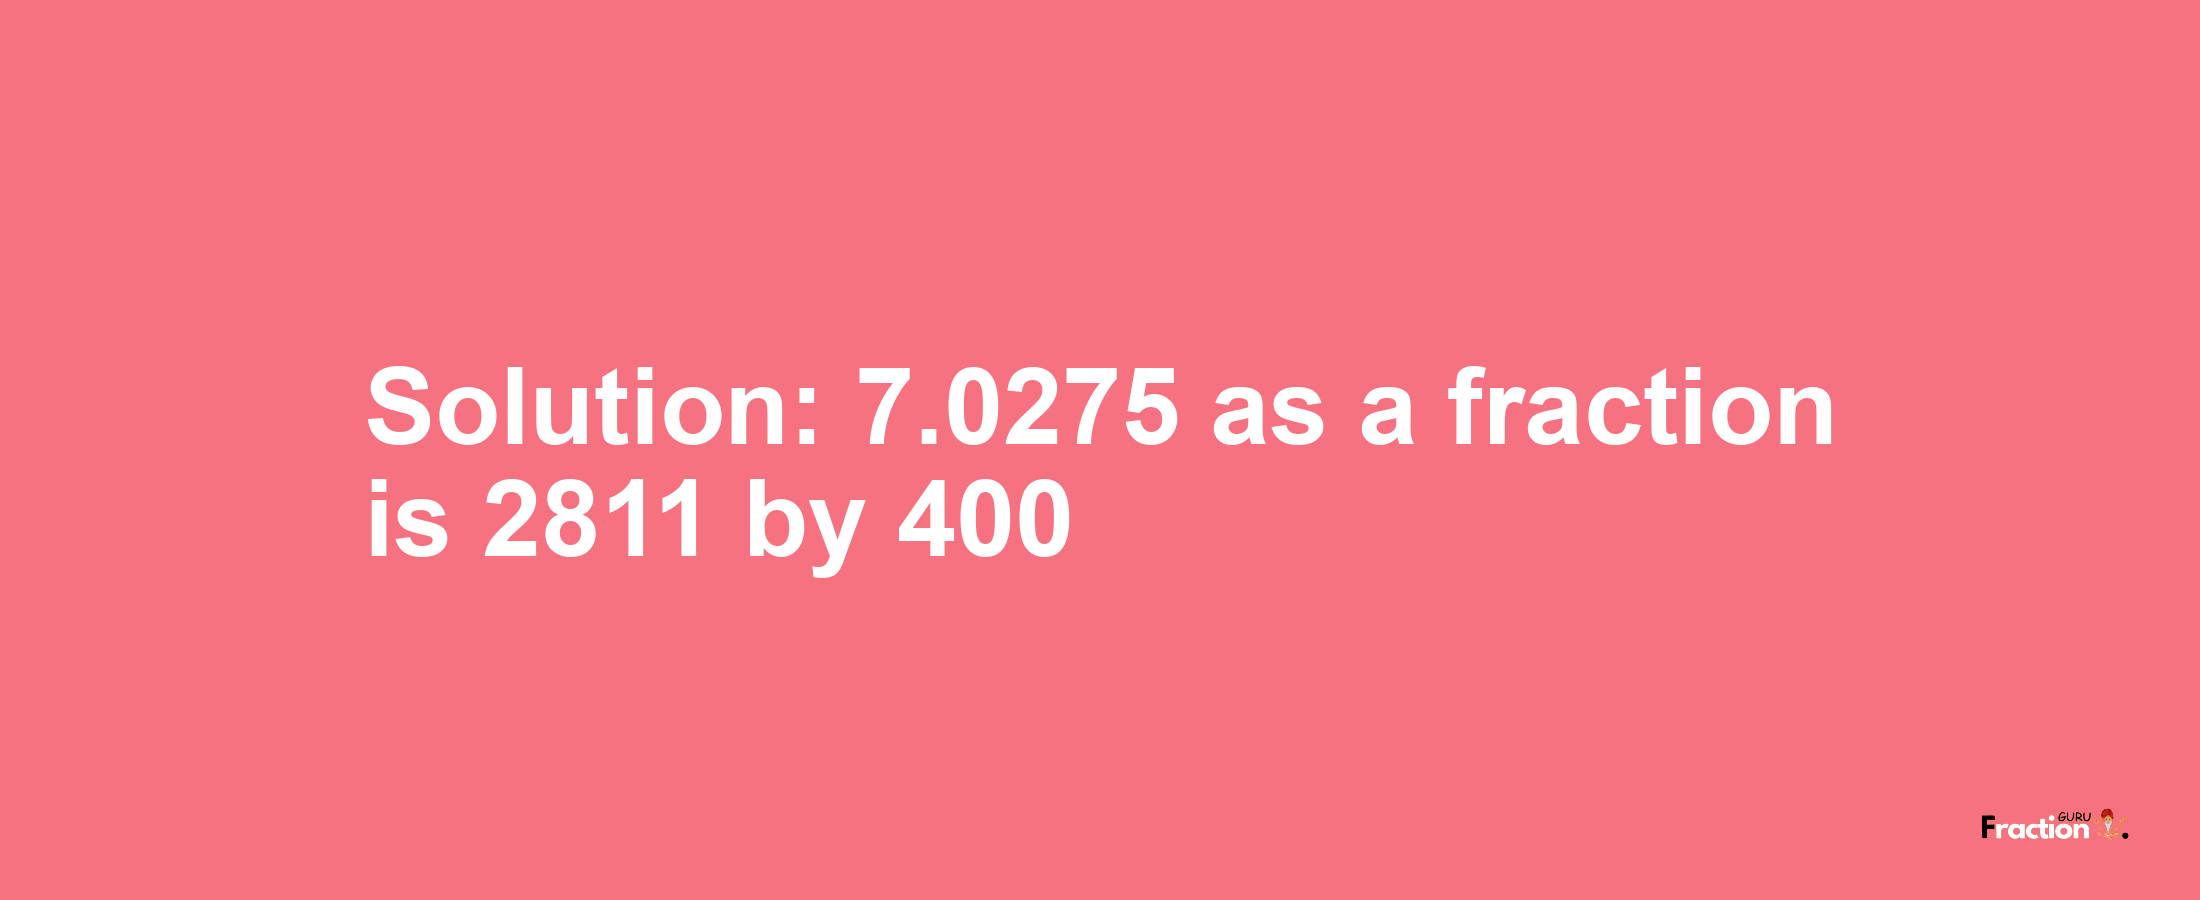 Solution:7.0275 as a fraction is 2811/400